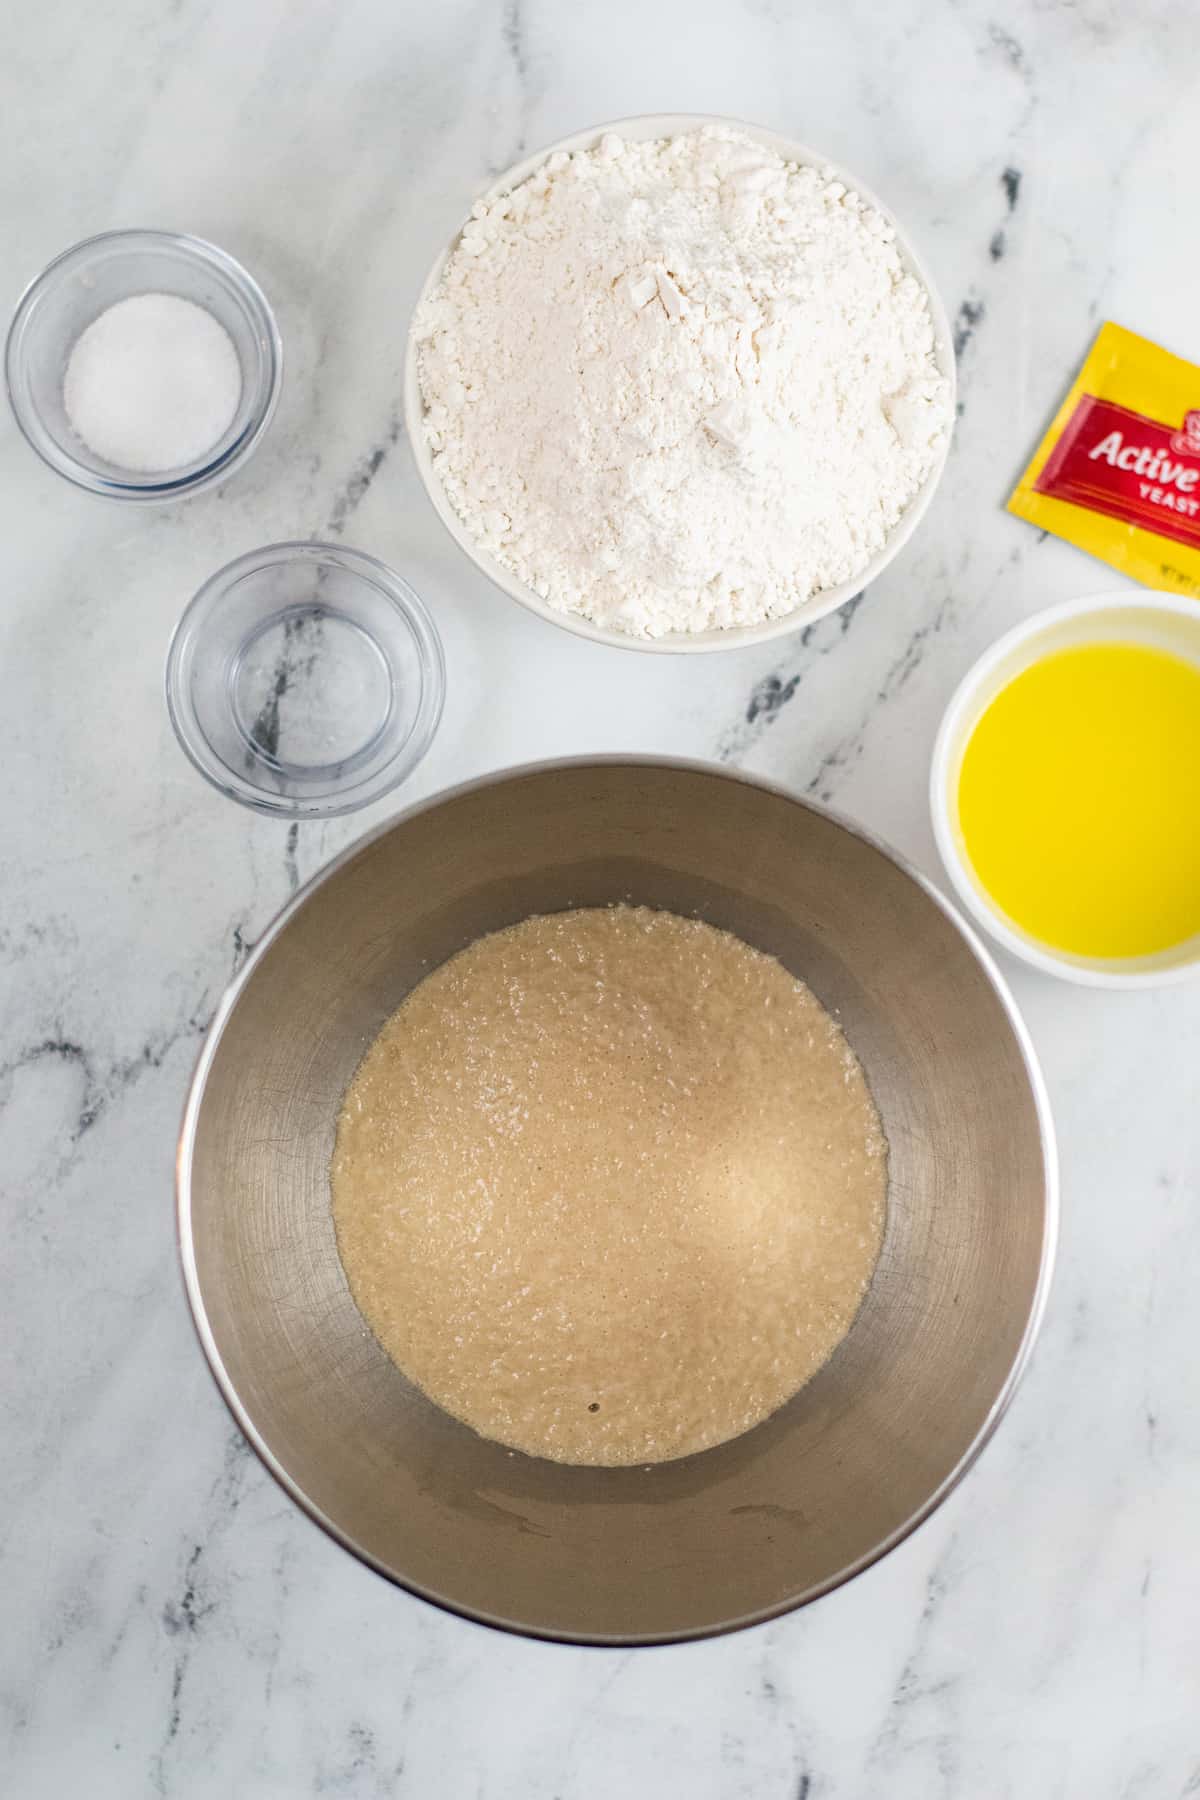 Yeast, warm water, and sugar in large bowl.